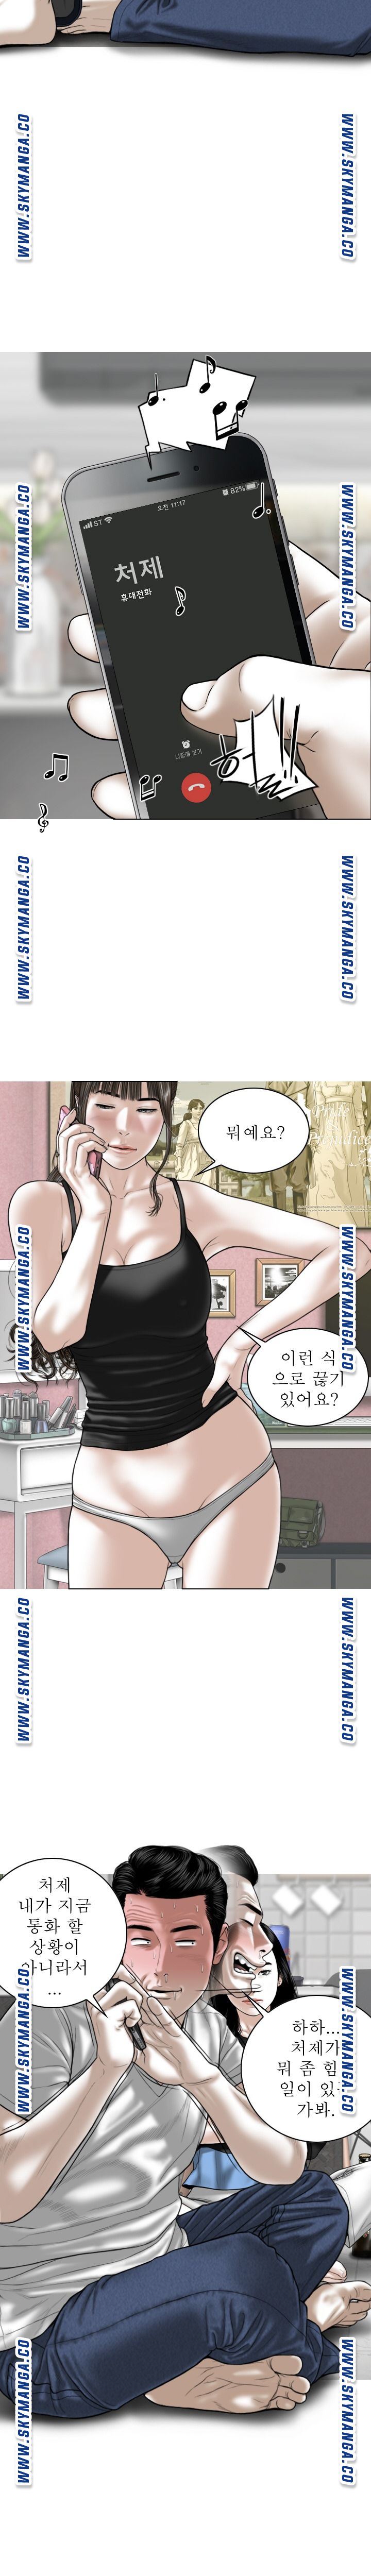 Female Friend Raw - Chapter 15 Page 4